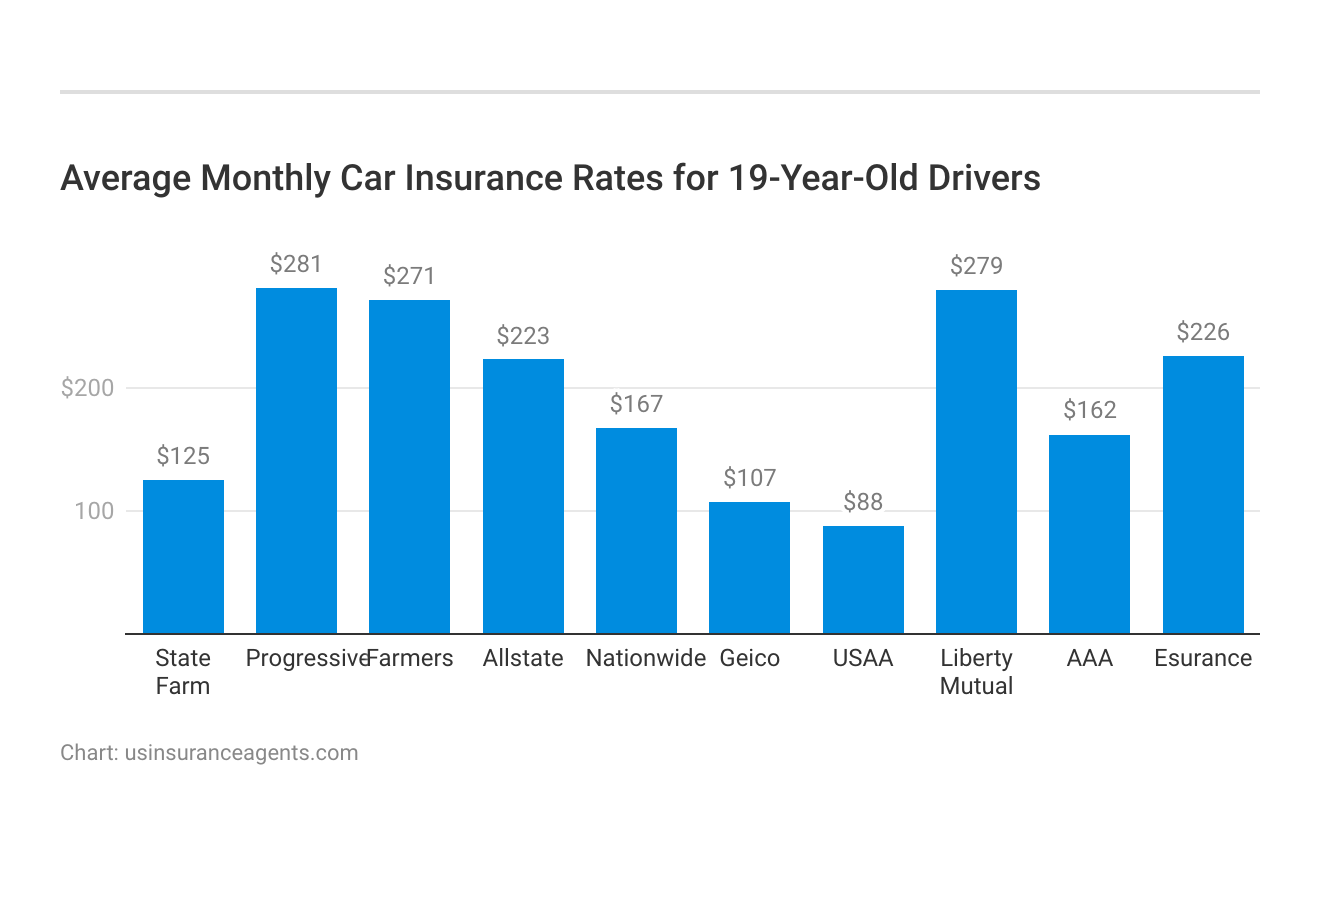 <h3>Average Monthly Car Insurance Rates for 19-Year-Old Drivers</h3>